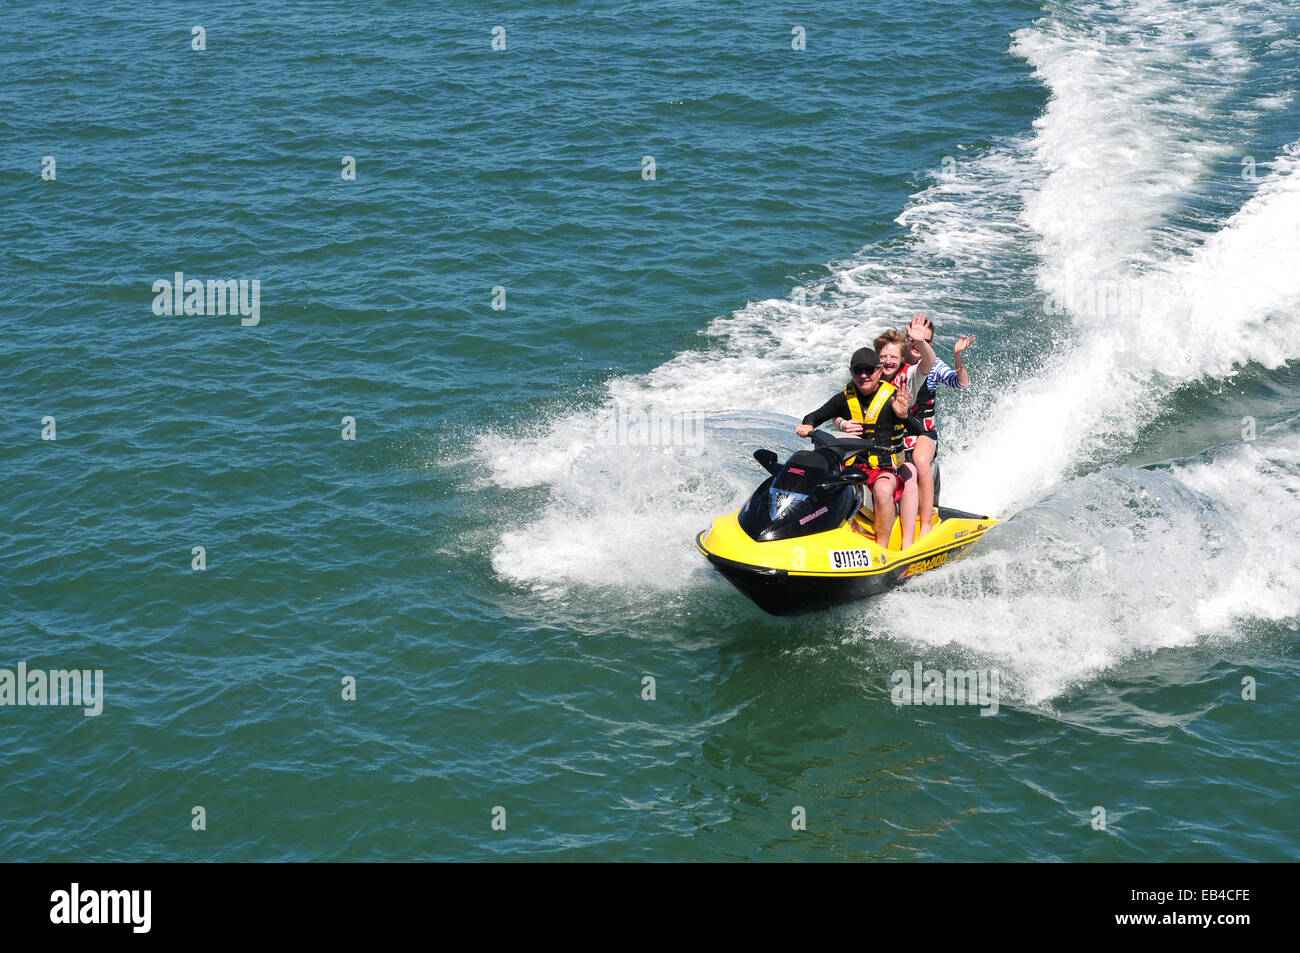 Family enjoying fast ride on jet sky creating significant wake wave on water surface. Stock Photo